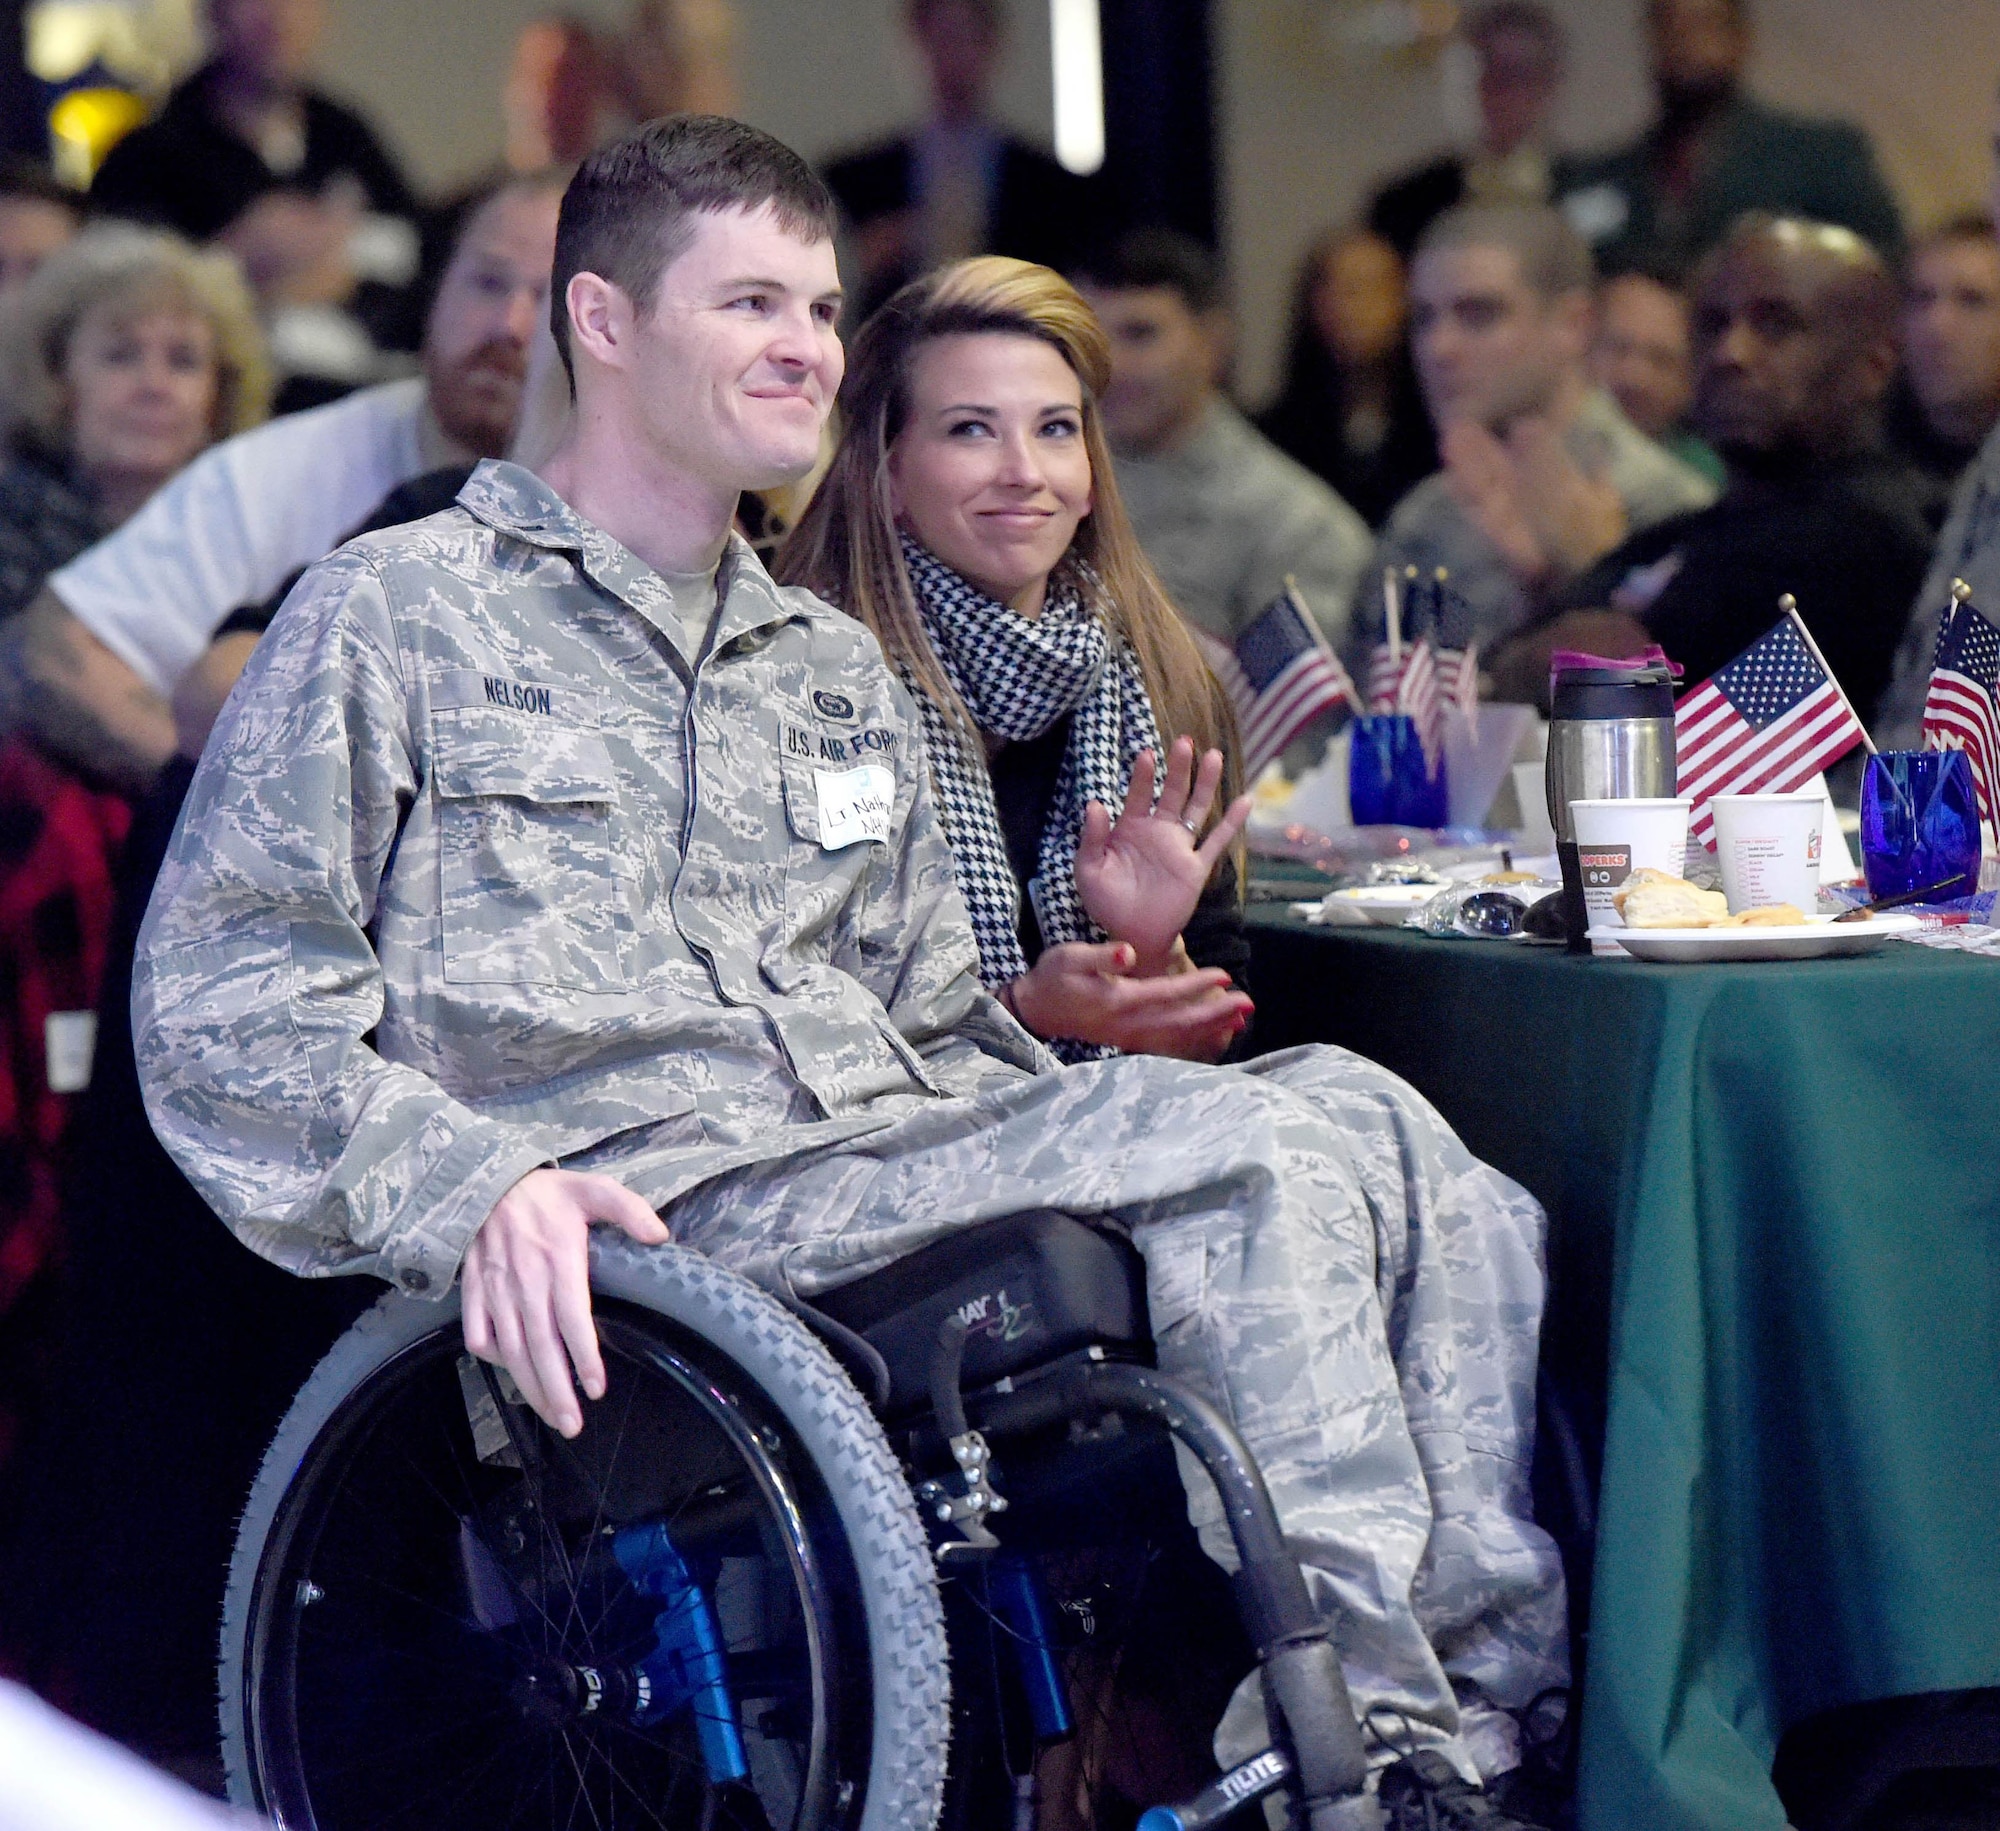 U.S. Air Force 1st Lt. Nate Nelson, 24th Special Operations Wing intelligence officer, and his wife Jennifer, are honored during a Florida Chamber of Commerce breakfast  Fort Walton Beach, Florida, on March 6, 2015. (Courtesy photo by Nick Tomecek/Northwest Florida Daily News)